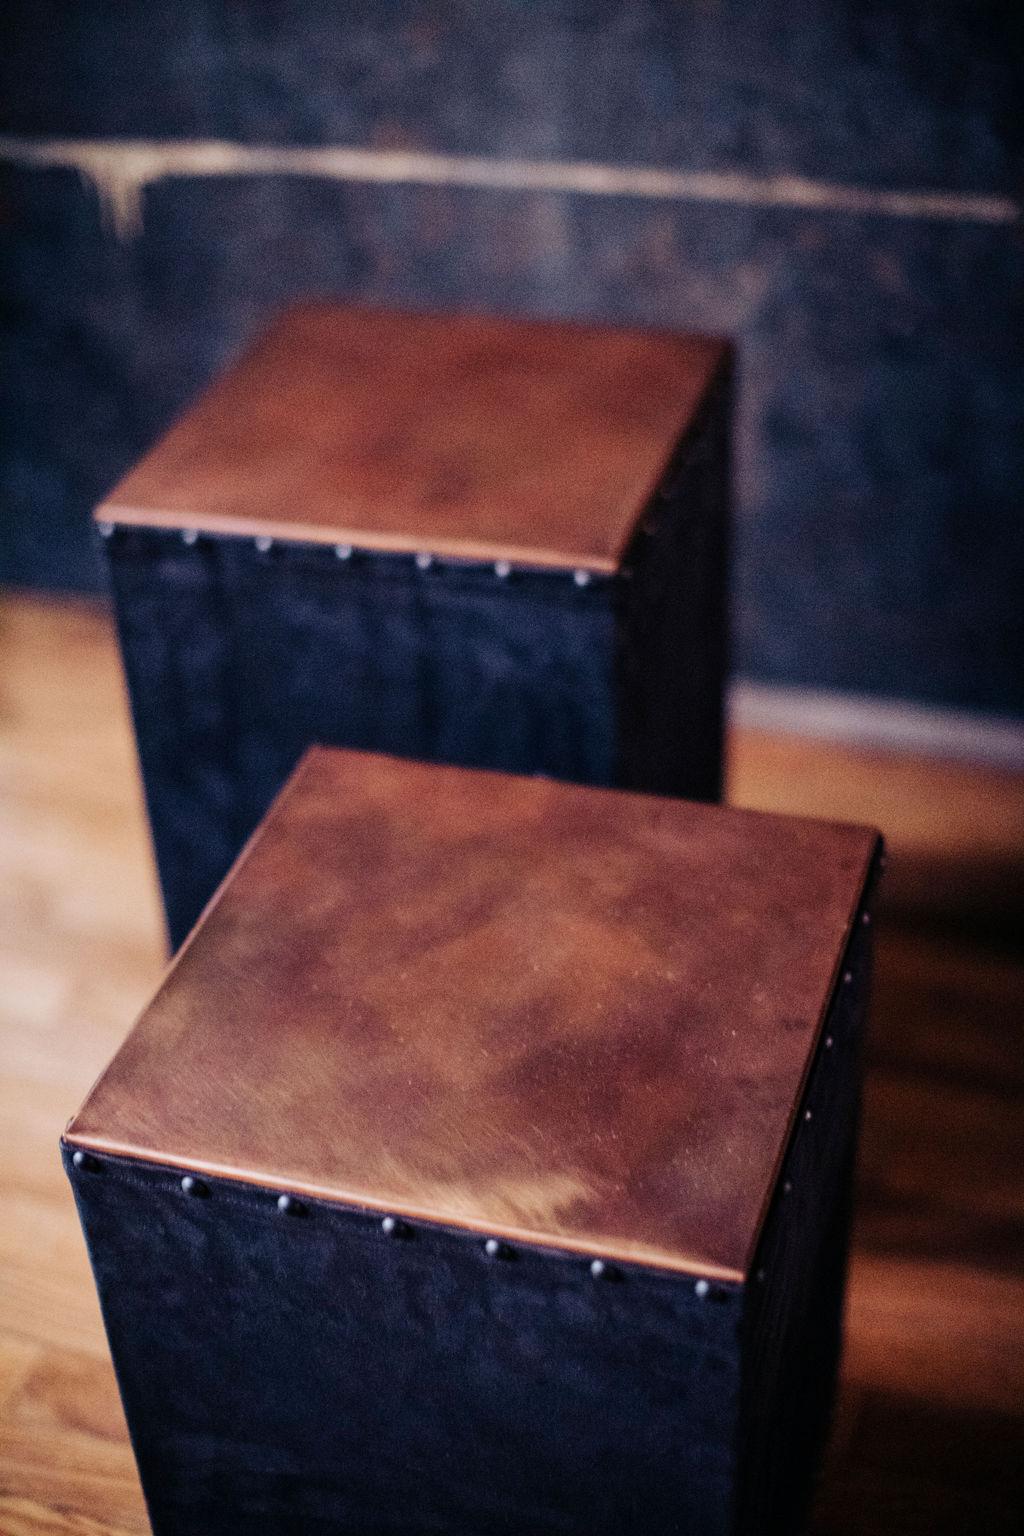 Modern leather side tables topped in copper, Catawba Series.

These modern leather side tables topped in copper are part of the Catawba Series designed and scheduled for our January 2022 launch. Each table made for Craft Associates Furniture is